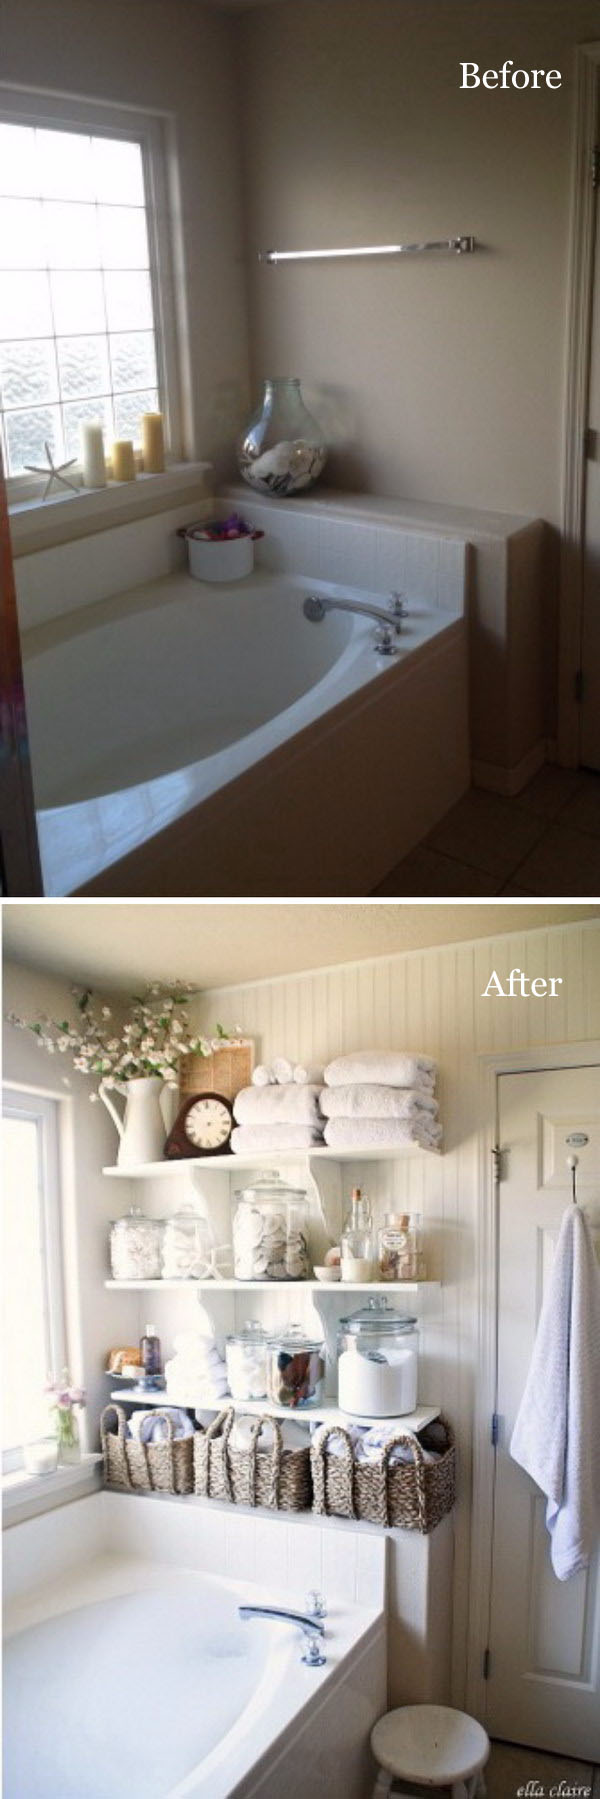 58-bathroom-remodel-before-and-after